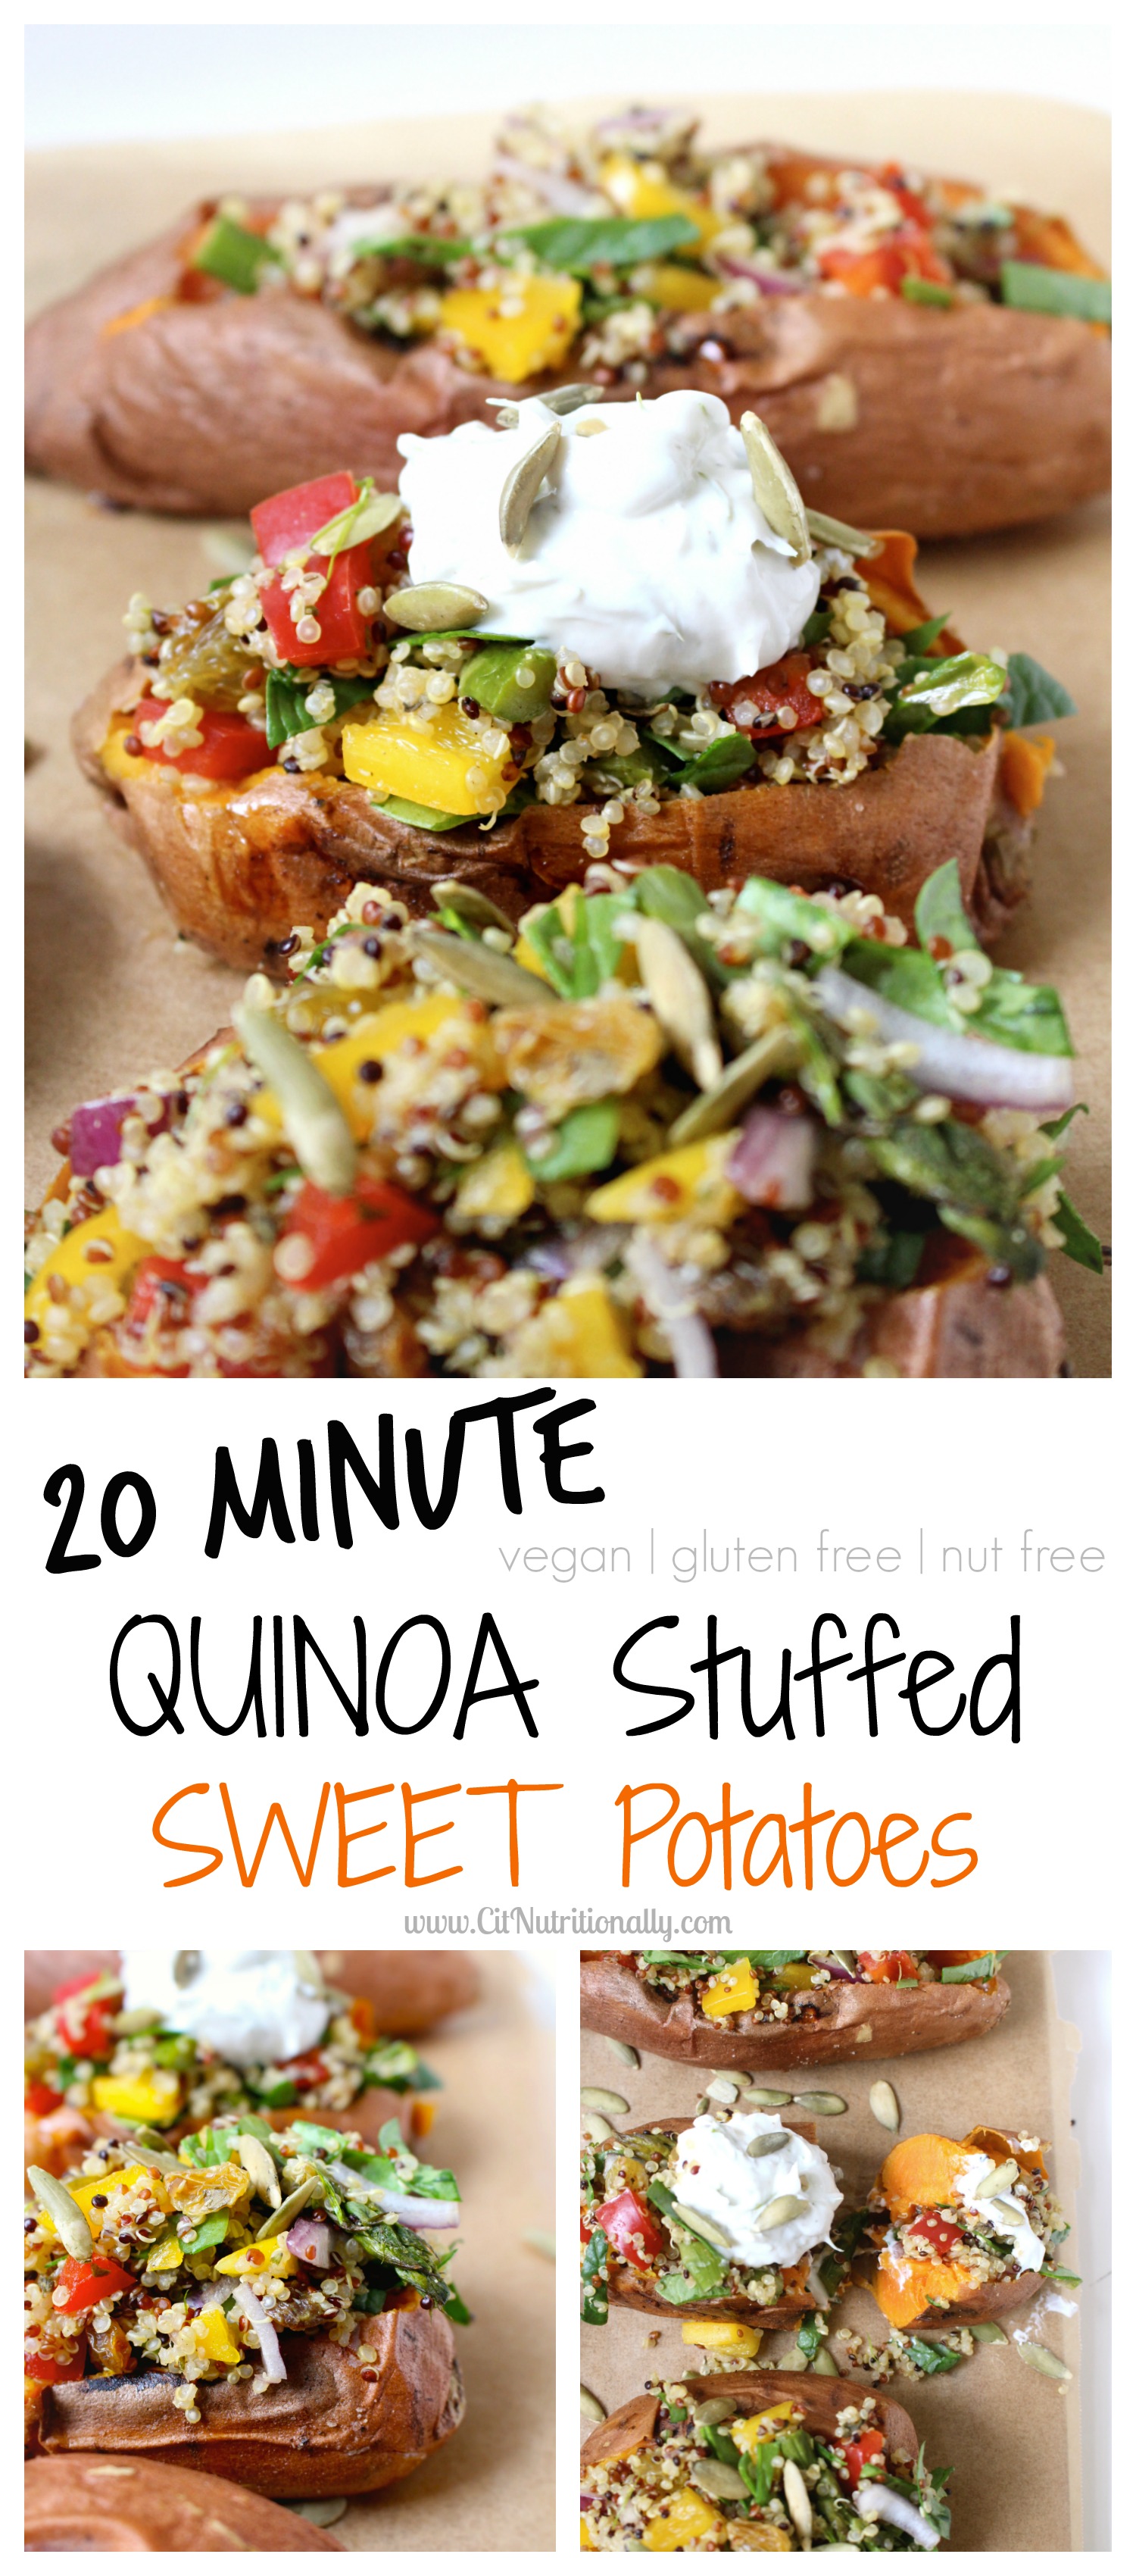 Comforting, flavorful, colorful and oh so good for you…Make weeknight cooking easy with these Quinoa Stuffed Sweet Potatoes…a healthy, plant-based meal you can get on the table in as little as 20 minutes! Vegan, gluten free, dairy free, nut free! Quinoa Stuffed Sweet Potatoes | C it Nutritionally